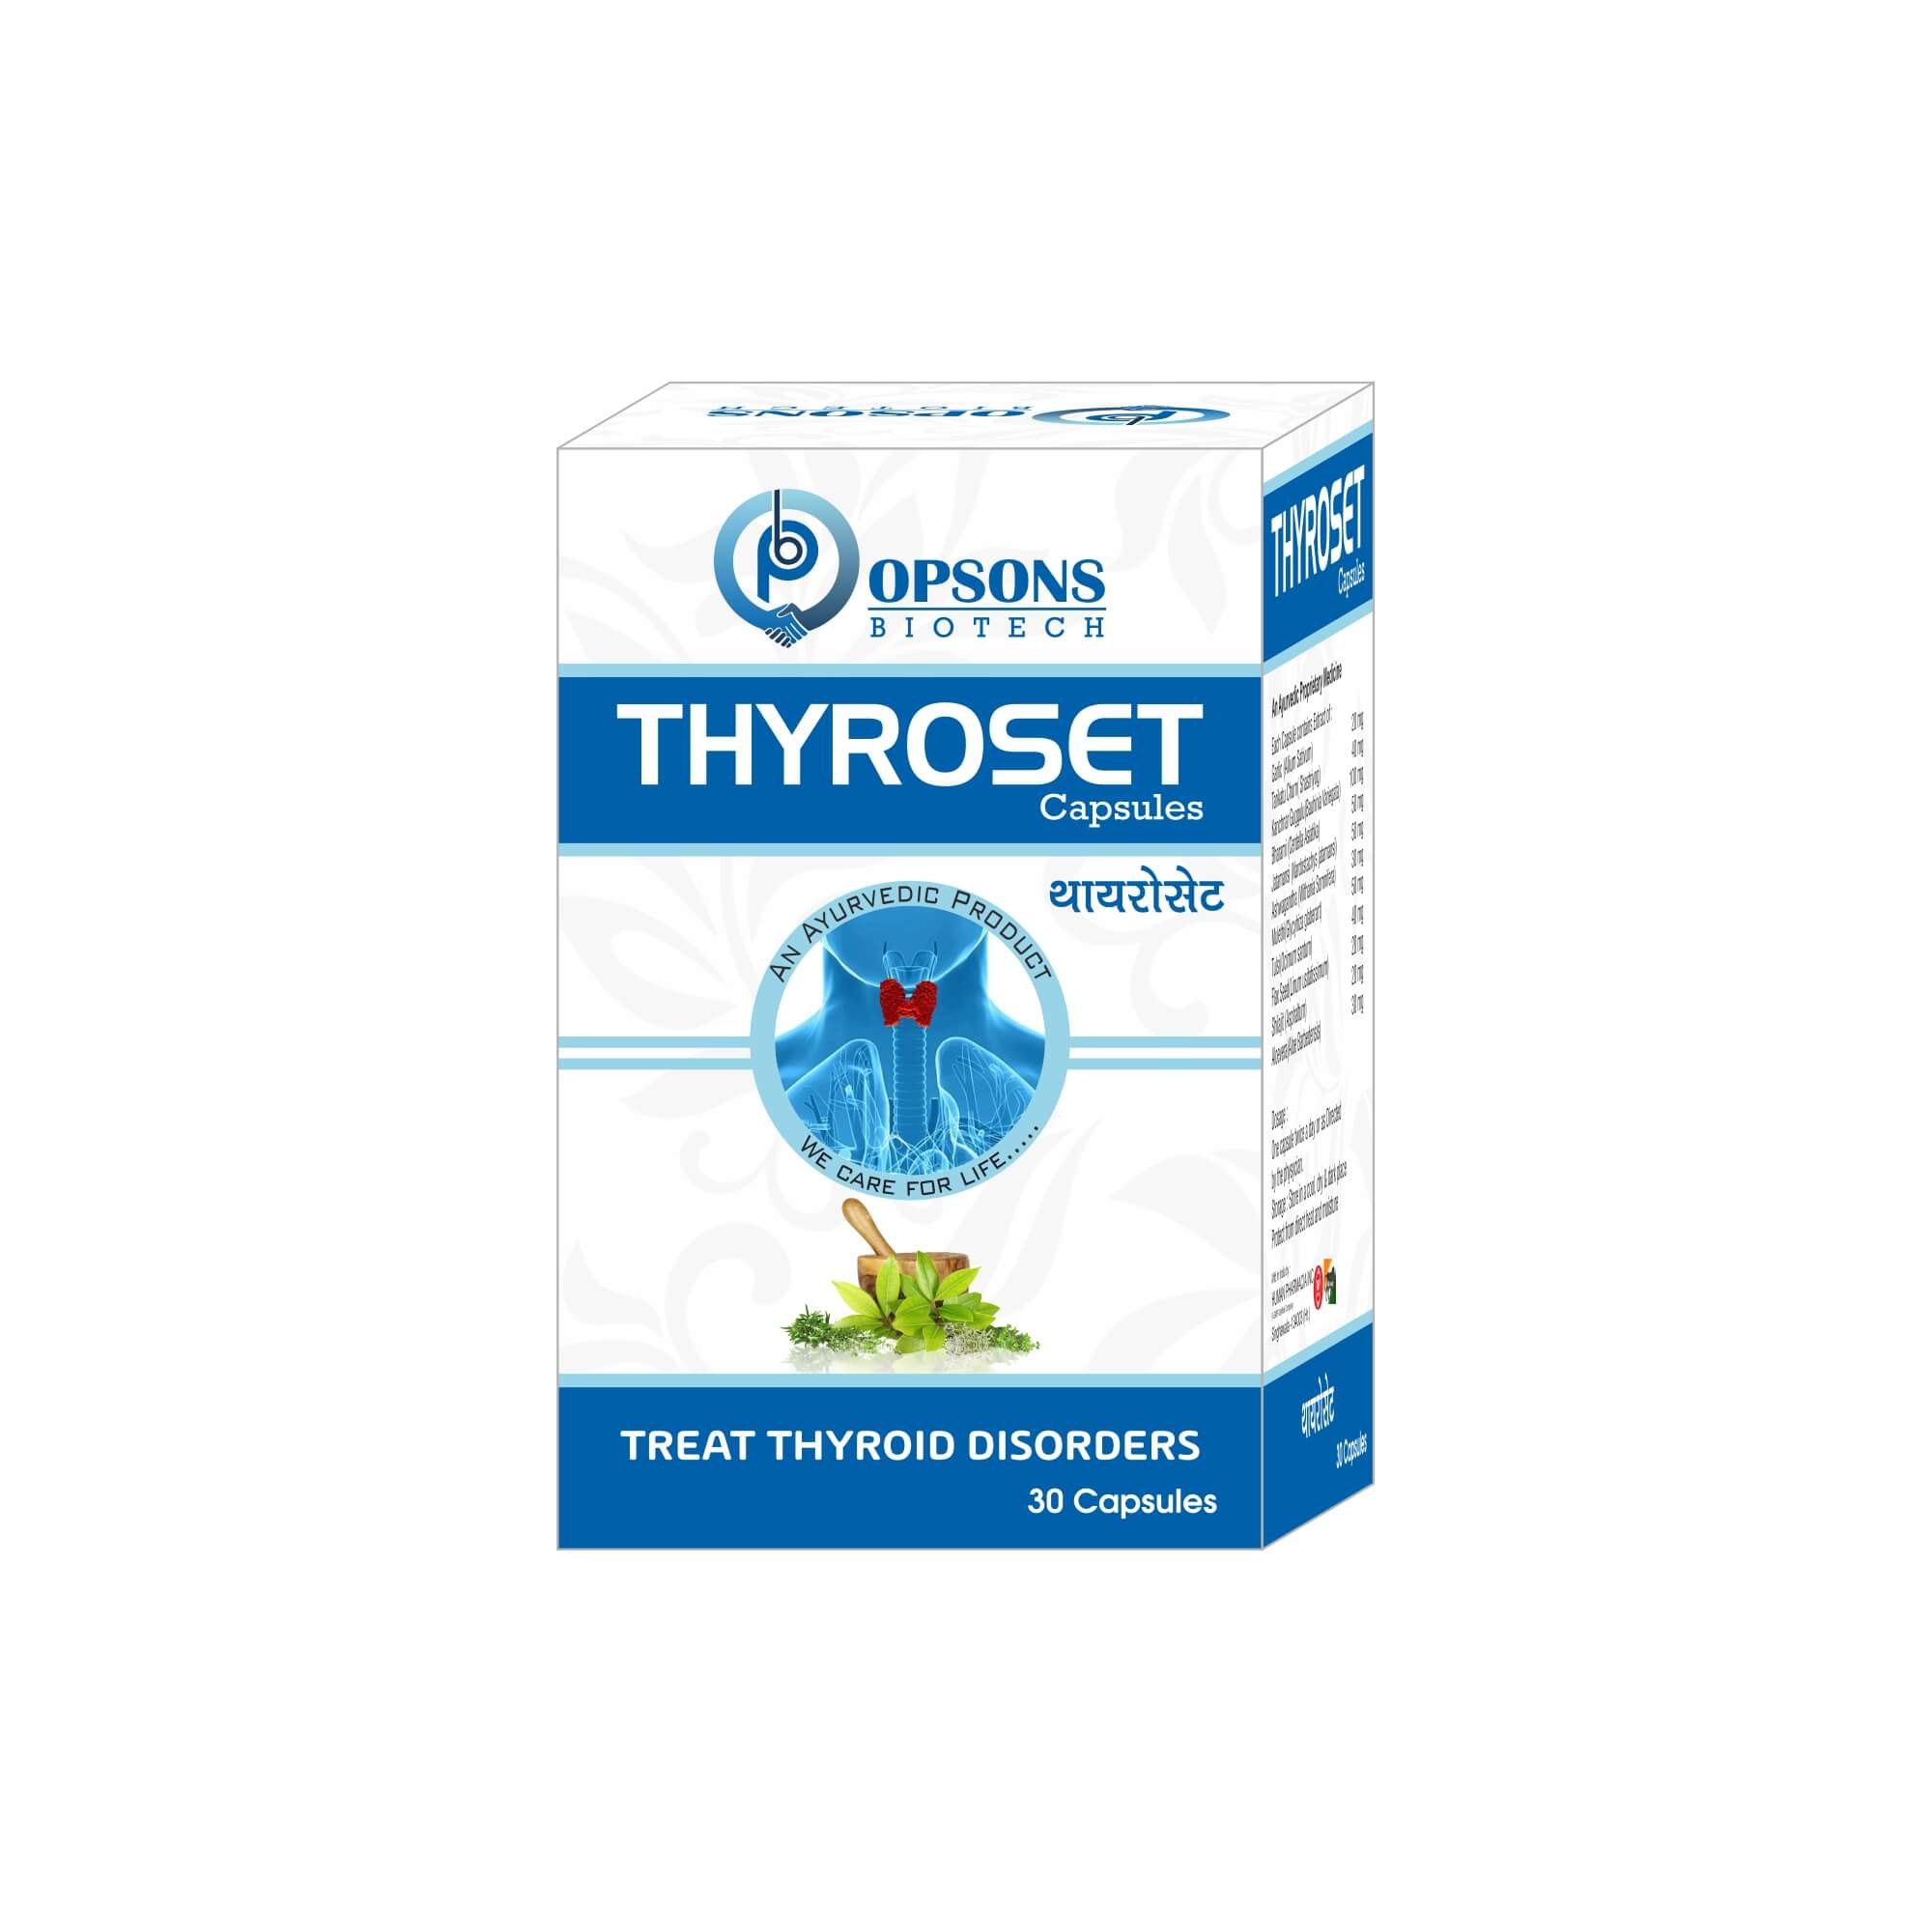 Product Name: Thyroset capsules, Compositions of are Treat Thyroid Disorders - Opsons Biotech